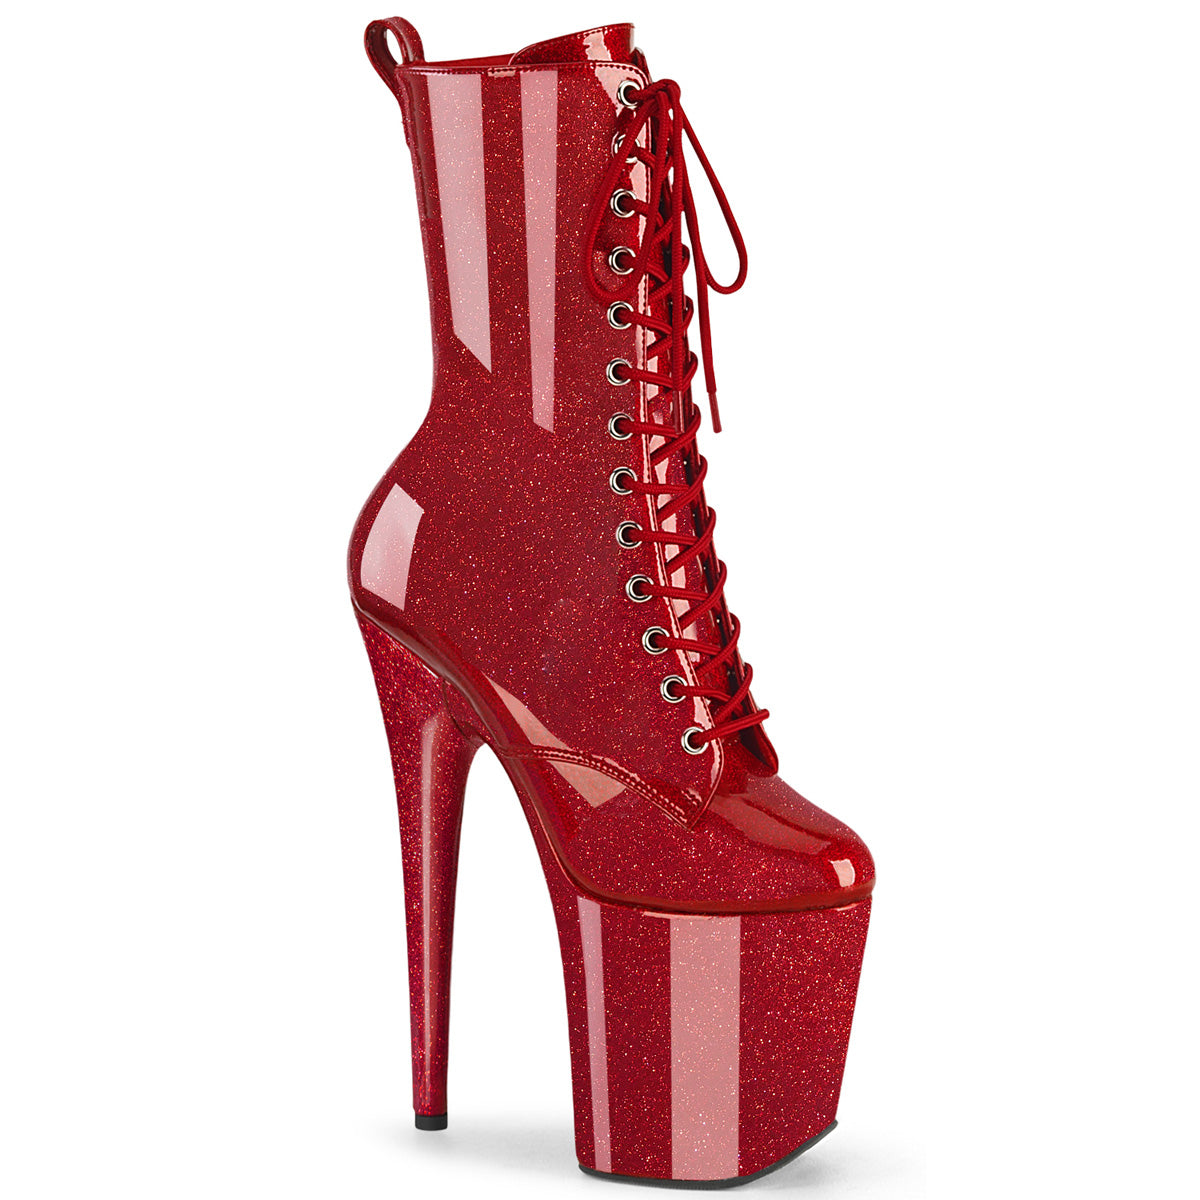 FLAMINGO-1040GP Pleaser 8 Inch Heel Red Gltter Ankle Boots Exotic Dancing